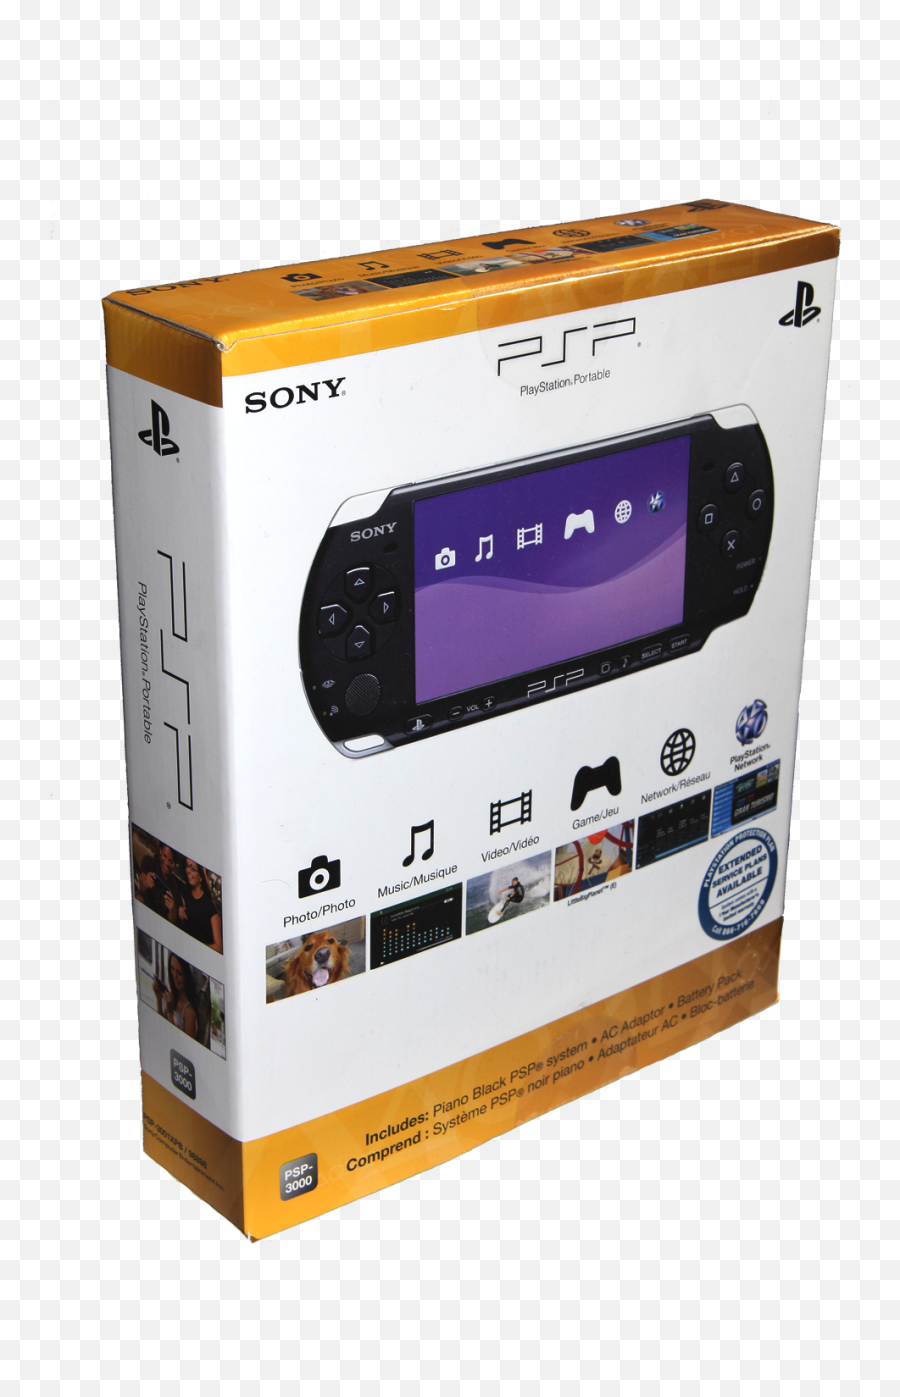 Psp 3000 In Box Transparent Png - Psp 3000 Box,Psp Png